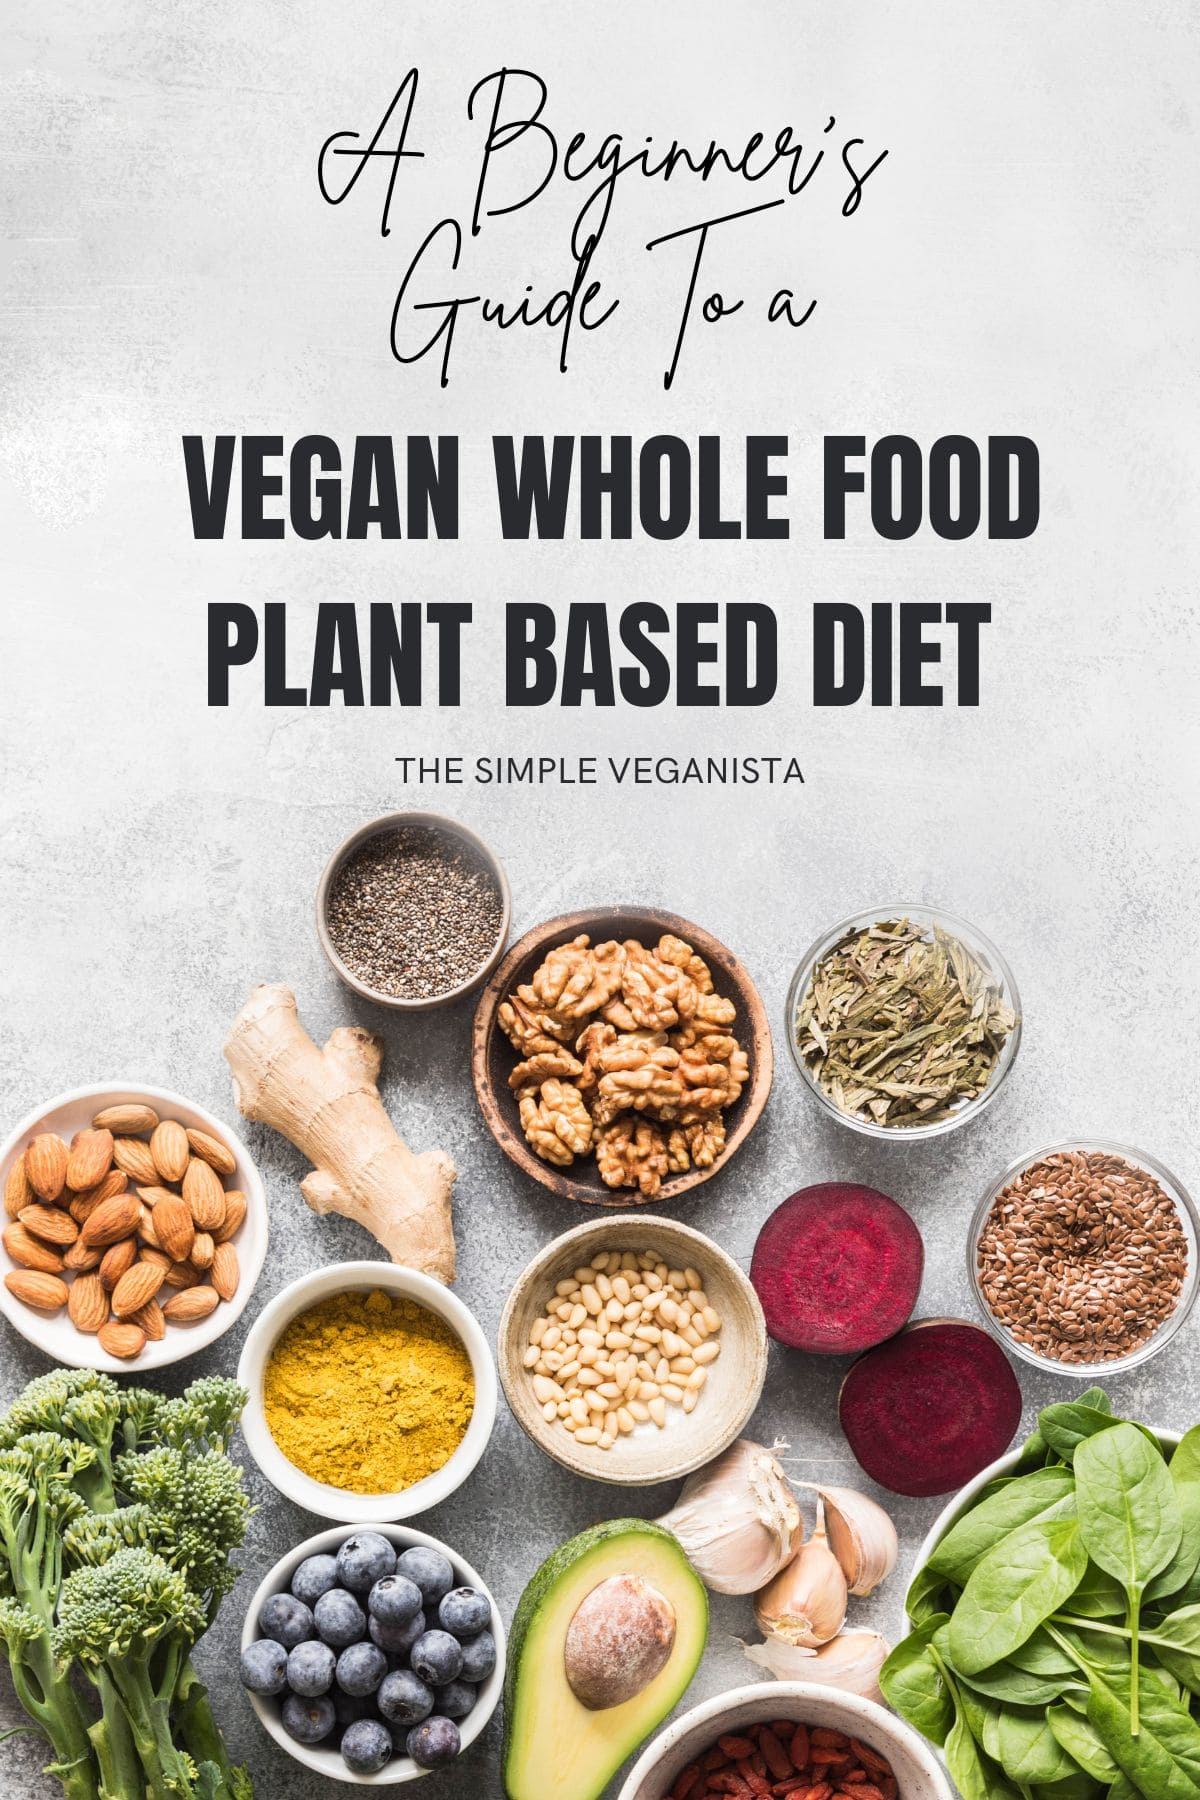 The Vegan Diet — A Complete Guide for Beginners